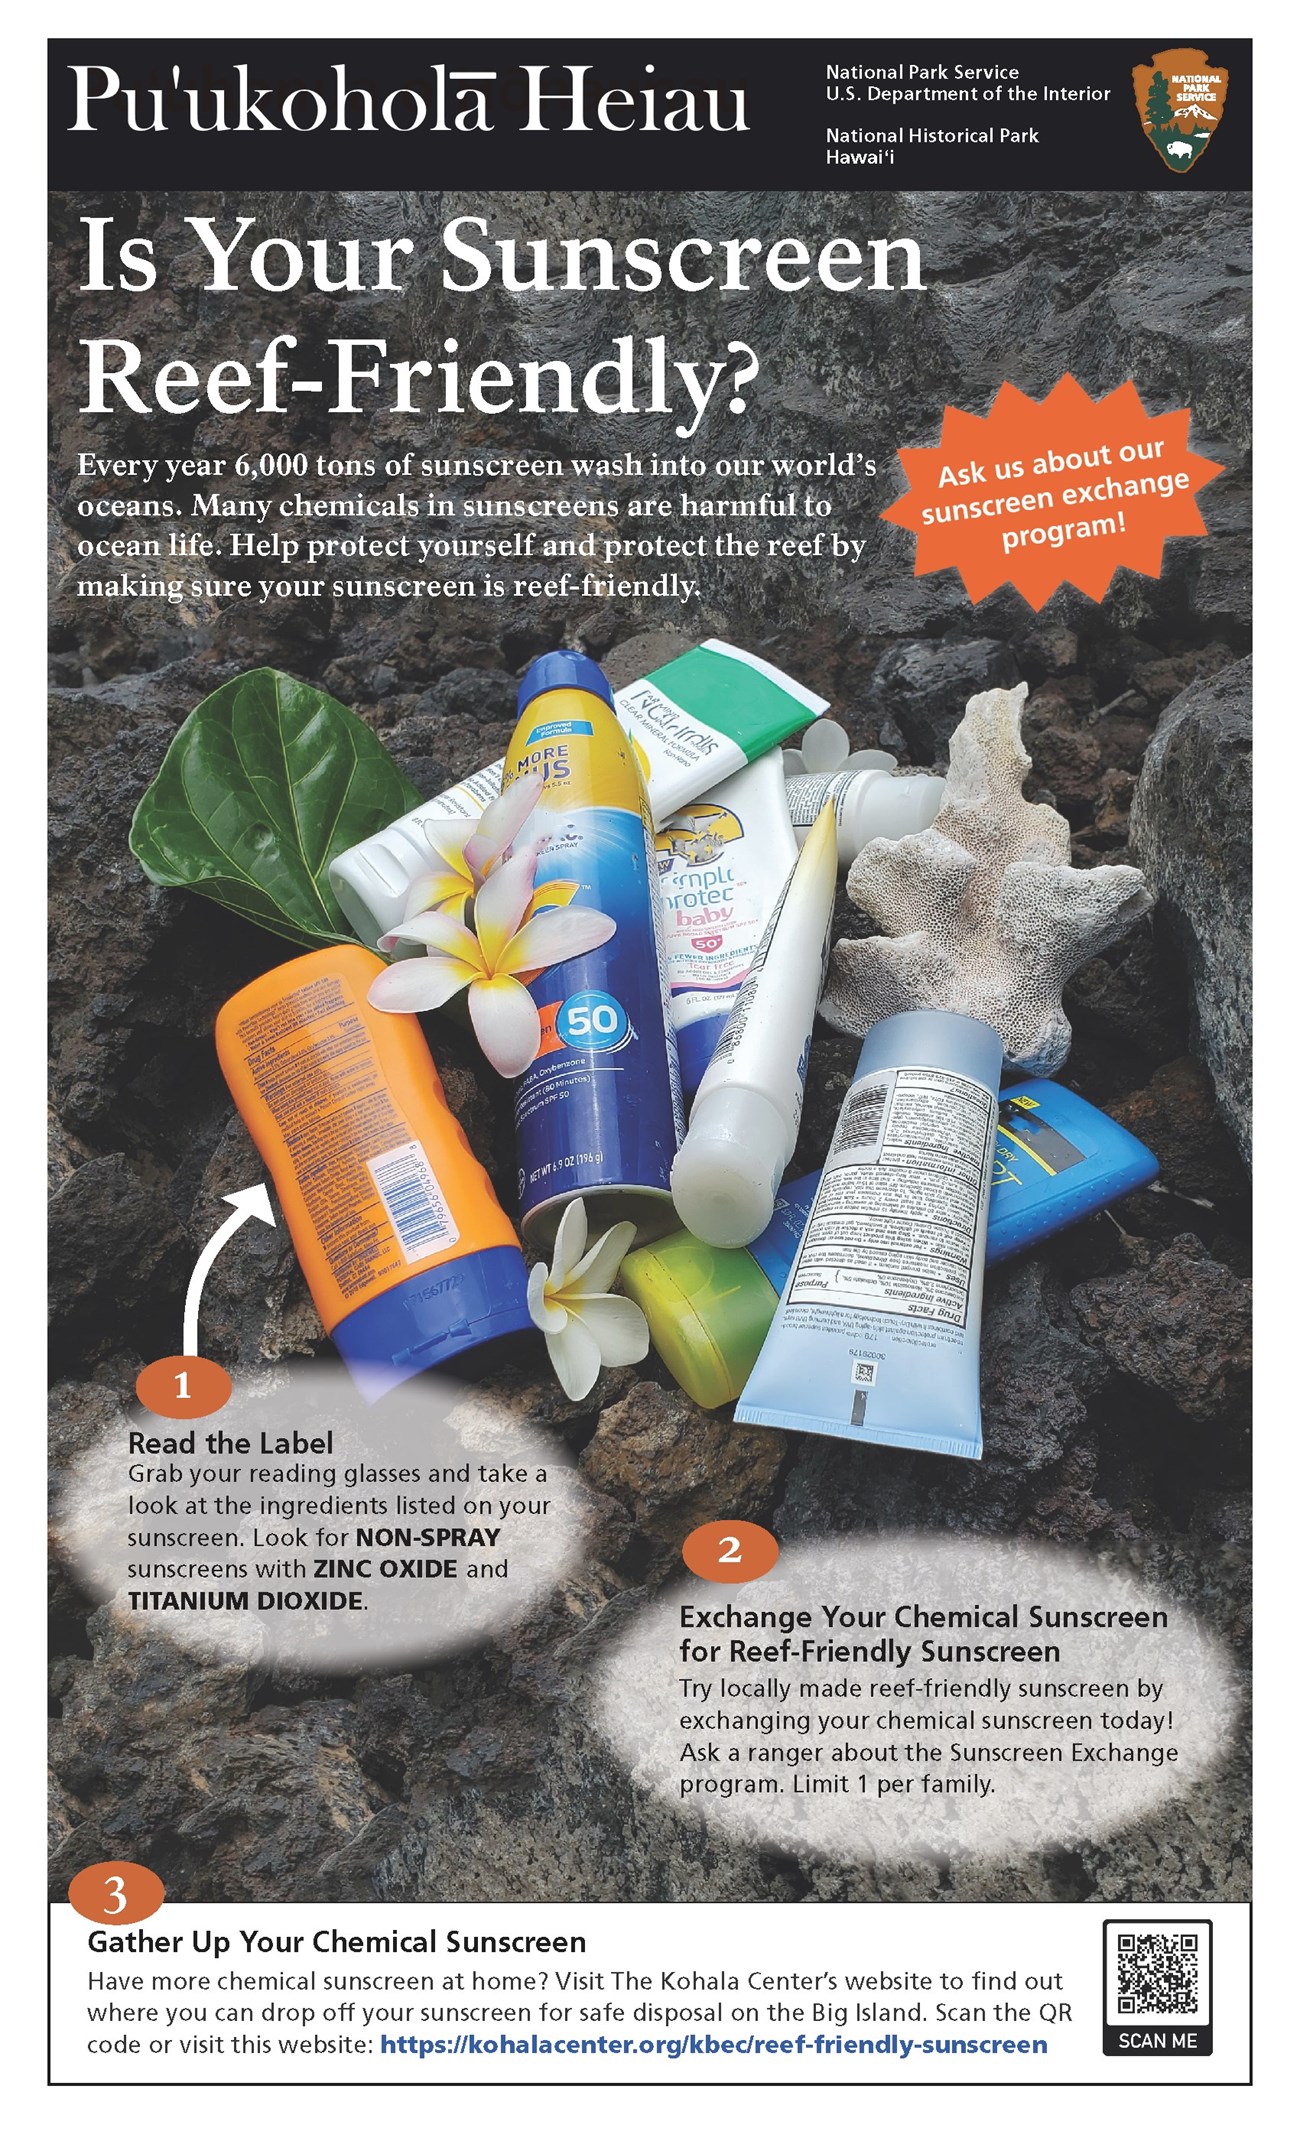 Sunscreen Exchange Poster